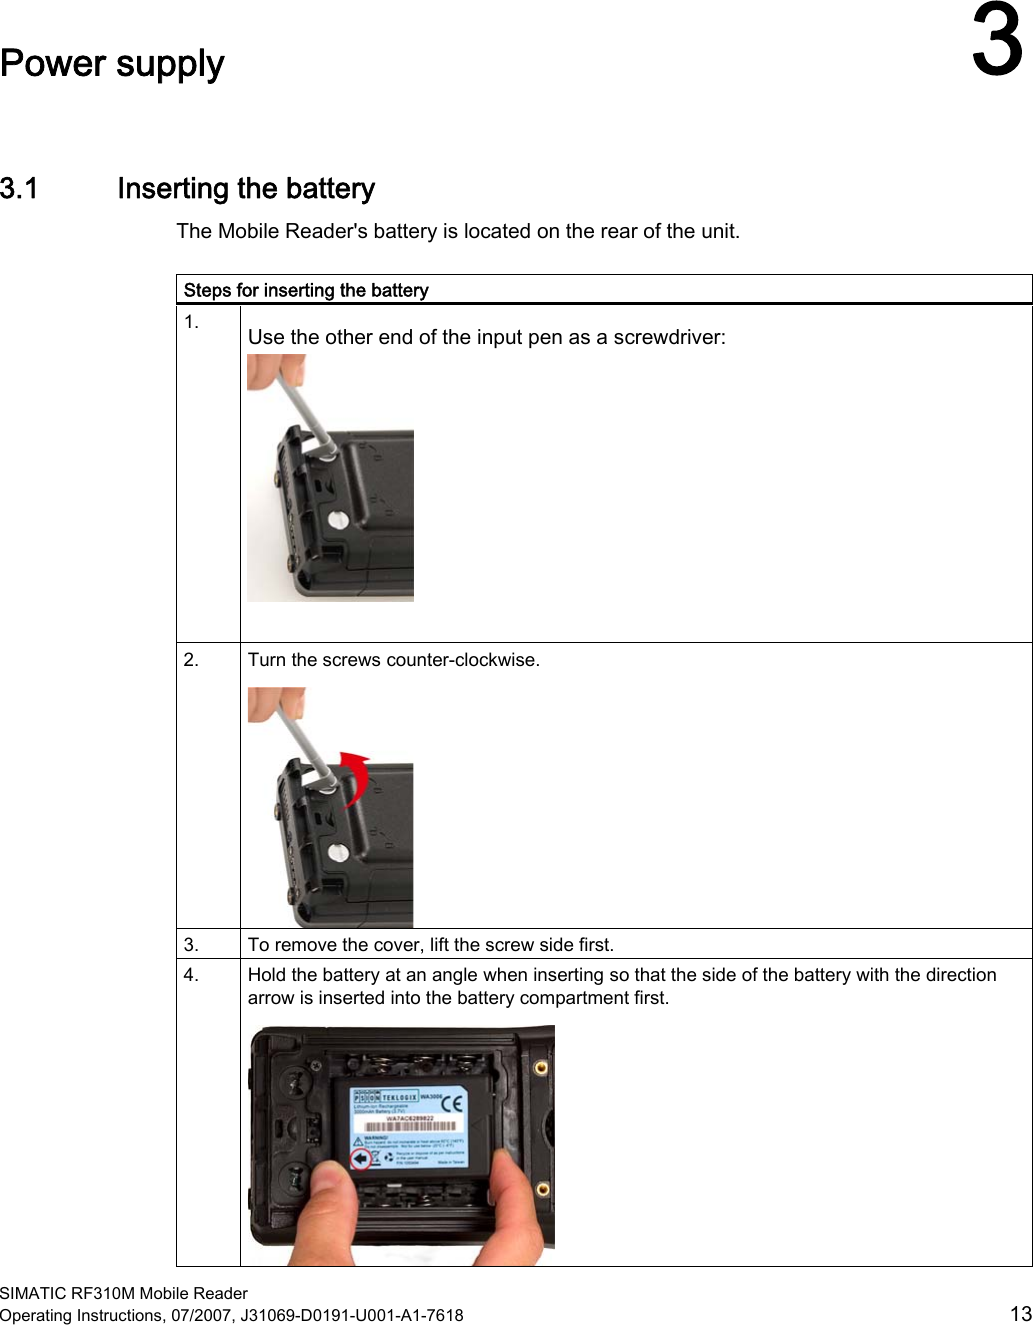  SIMATIC RF310M Mobile Reader Operating Instructions, 07/2007, J31069-D0191-U001-A1-7618  13 Power supply  33.1 Inserting the battery The Mobile Reader&apos;s battery is located on the rear of the unit.  Steps for inserting the battery 1.  Use the other end of the input pen as a screwdriver:   2.  Turn the screws counter-clockwise.  3.   To remove the cover, lift the screw side first. 4.  Hold the battery at an angle when inserting so that the side of the battery with the direction arrow is inserted into the battery compartment first.  